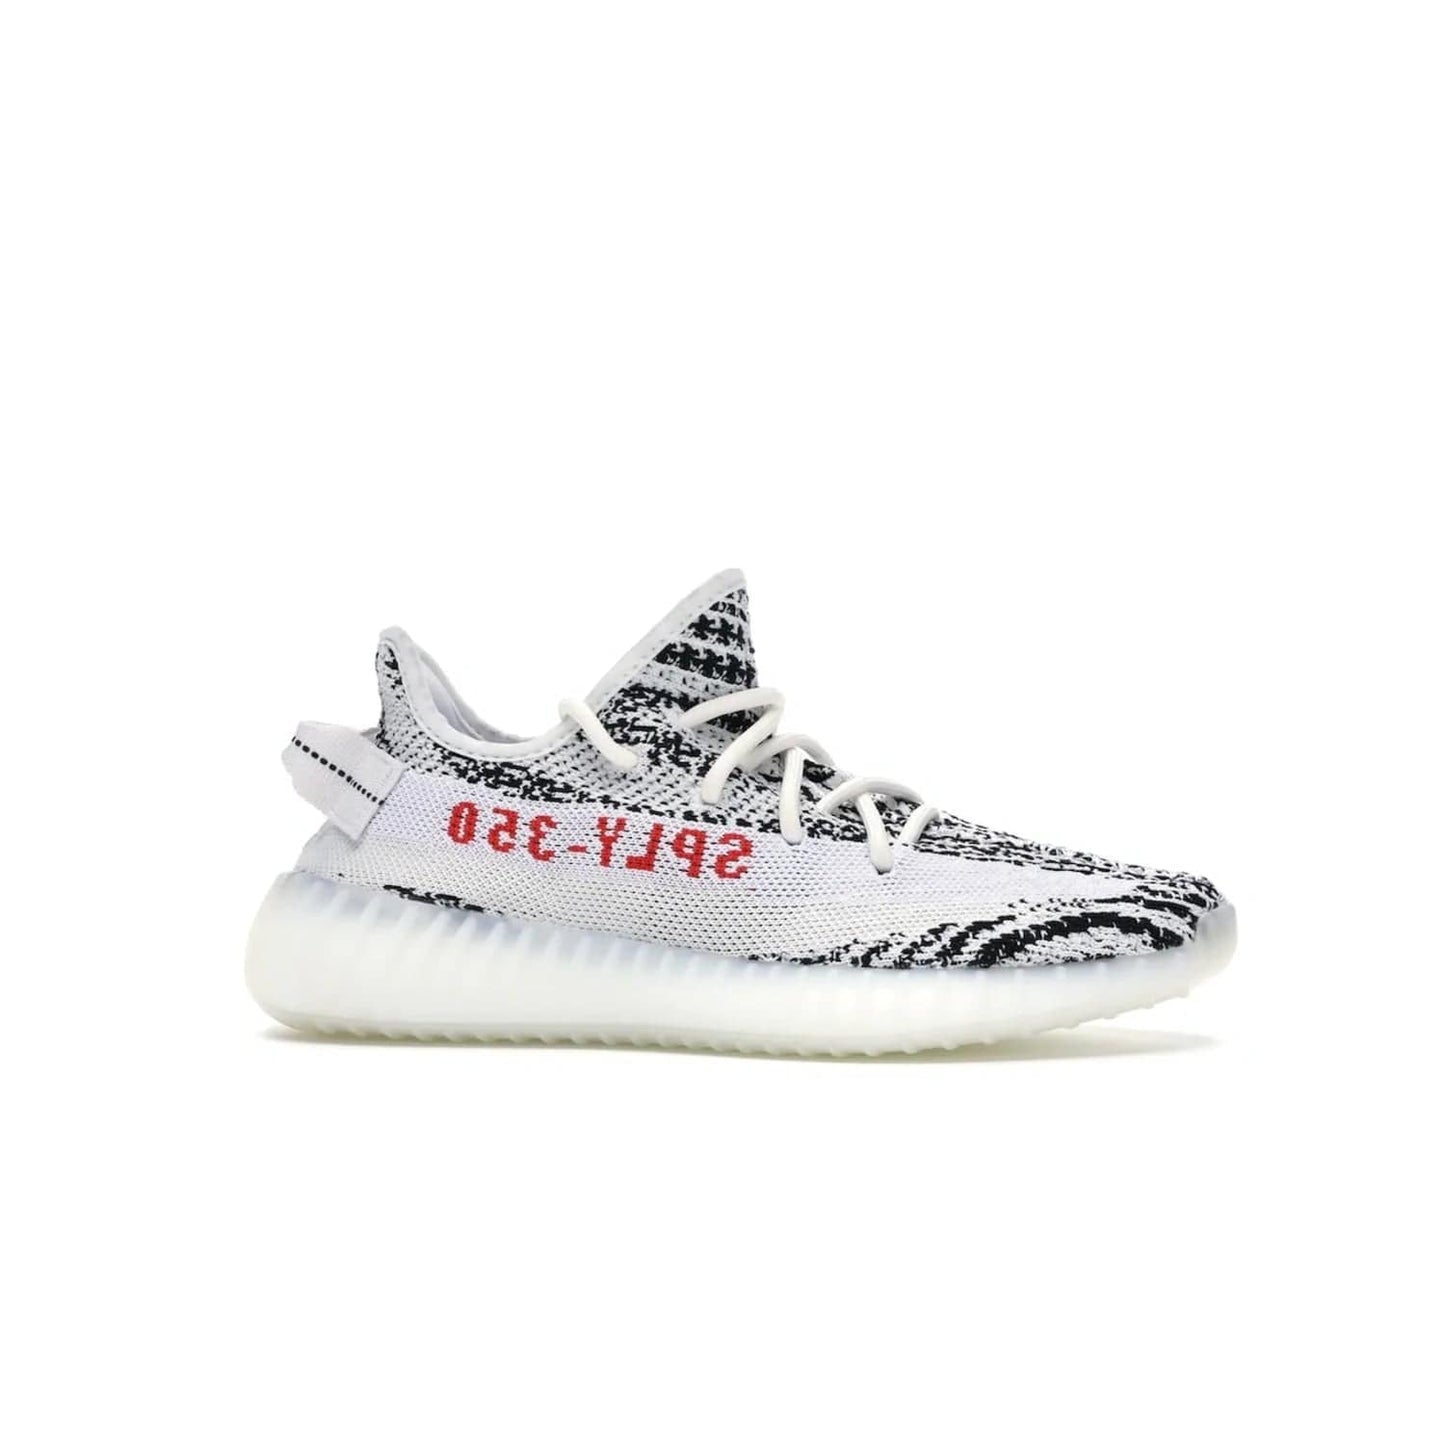 adidas Yeezy Boost 350 V2 Zebra - Image 2 - Only at www.BallersClubKickz.com - #
Score the iconic adidas Yeezy Boost 350 V2 Zebra for a fashionable addition to your street-style. Featuring a Primeknit upper and Boost sole, you'll look great and feel comfortable with every step.